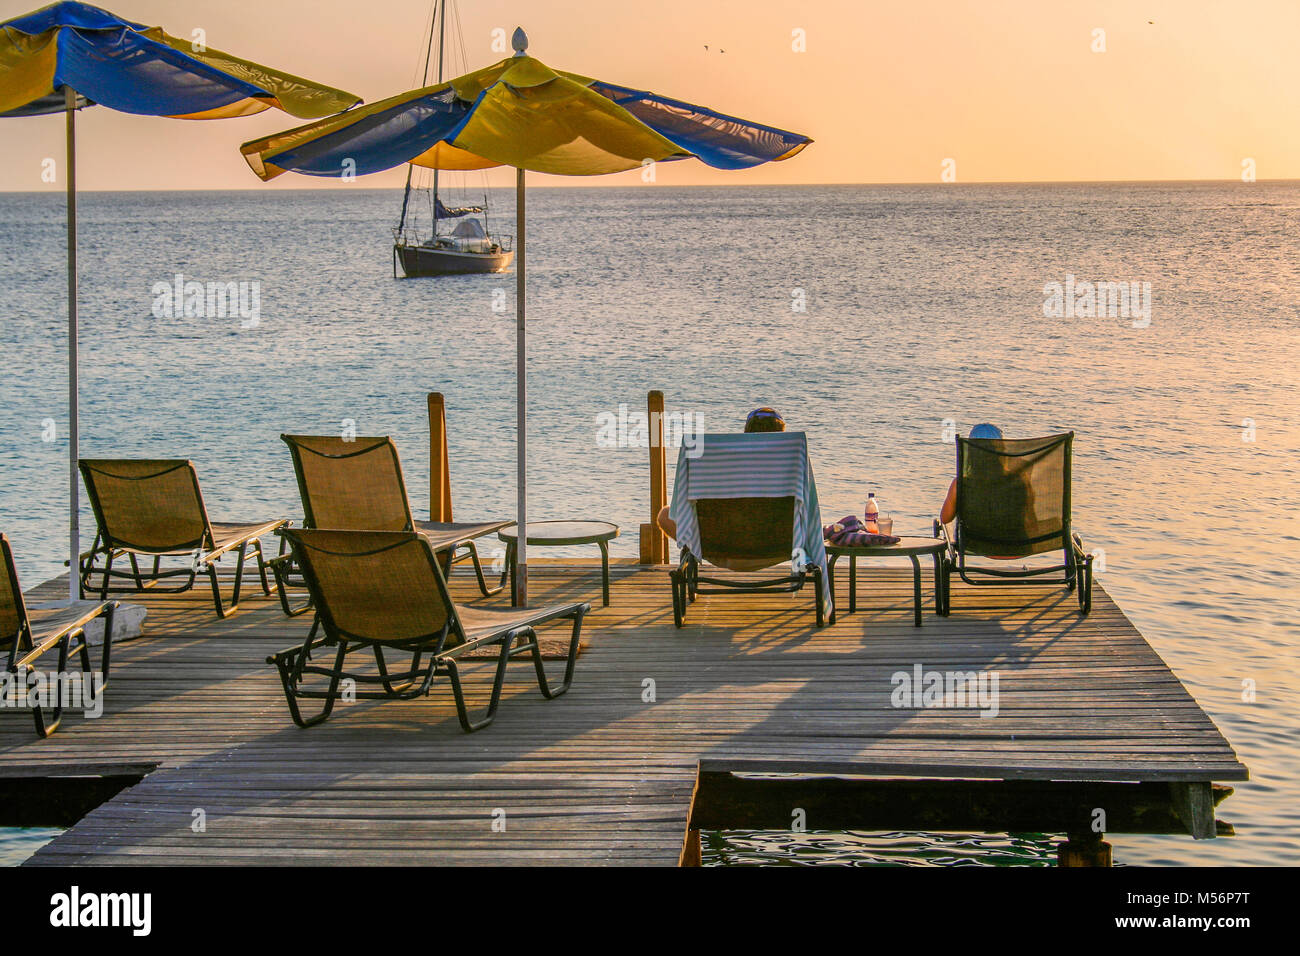 Couple sitting in deckchairs on a wooden boatdeck relaxing and enjoying the sunset in the Carribean Stock Photo